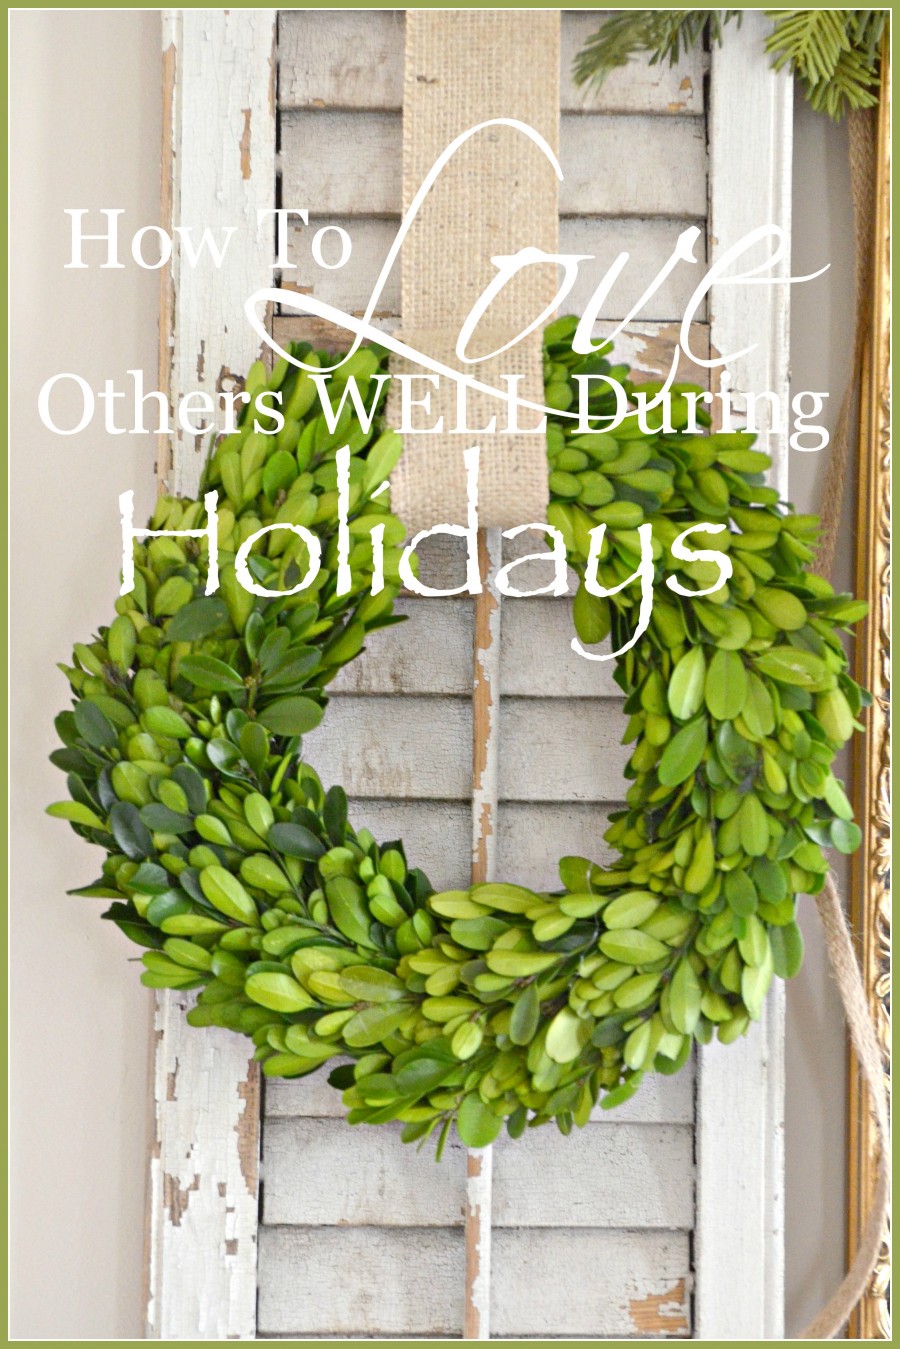 HOW TO LOVE OTHERS WELL OVER THE HOLIDAYS